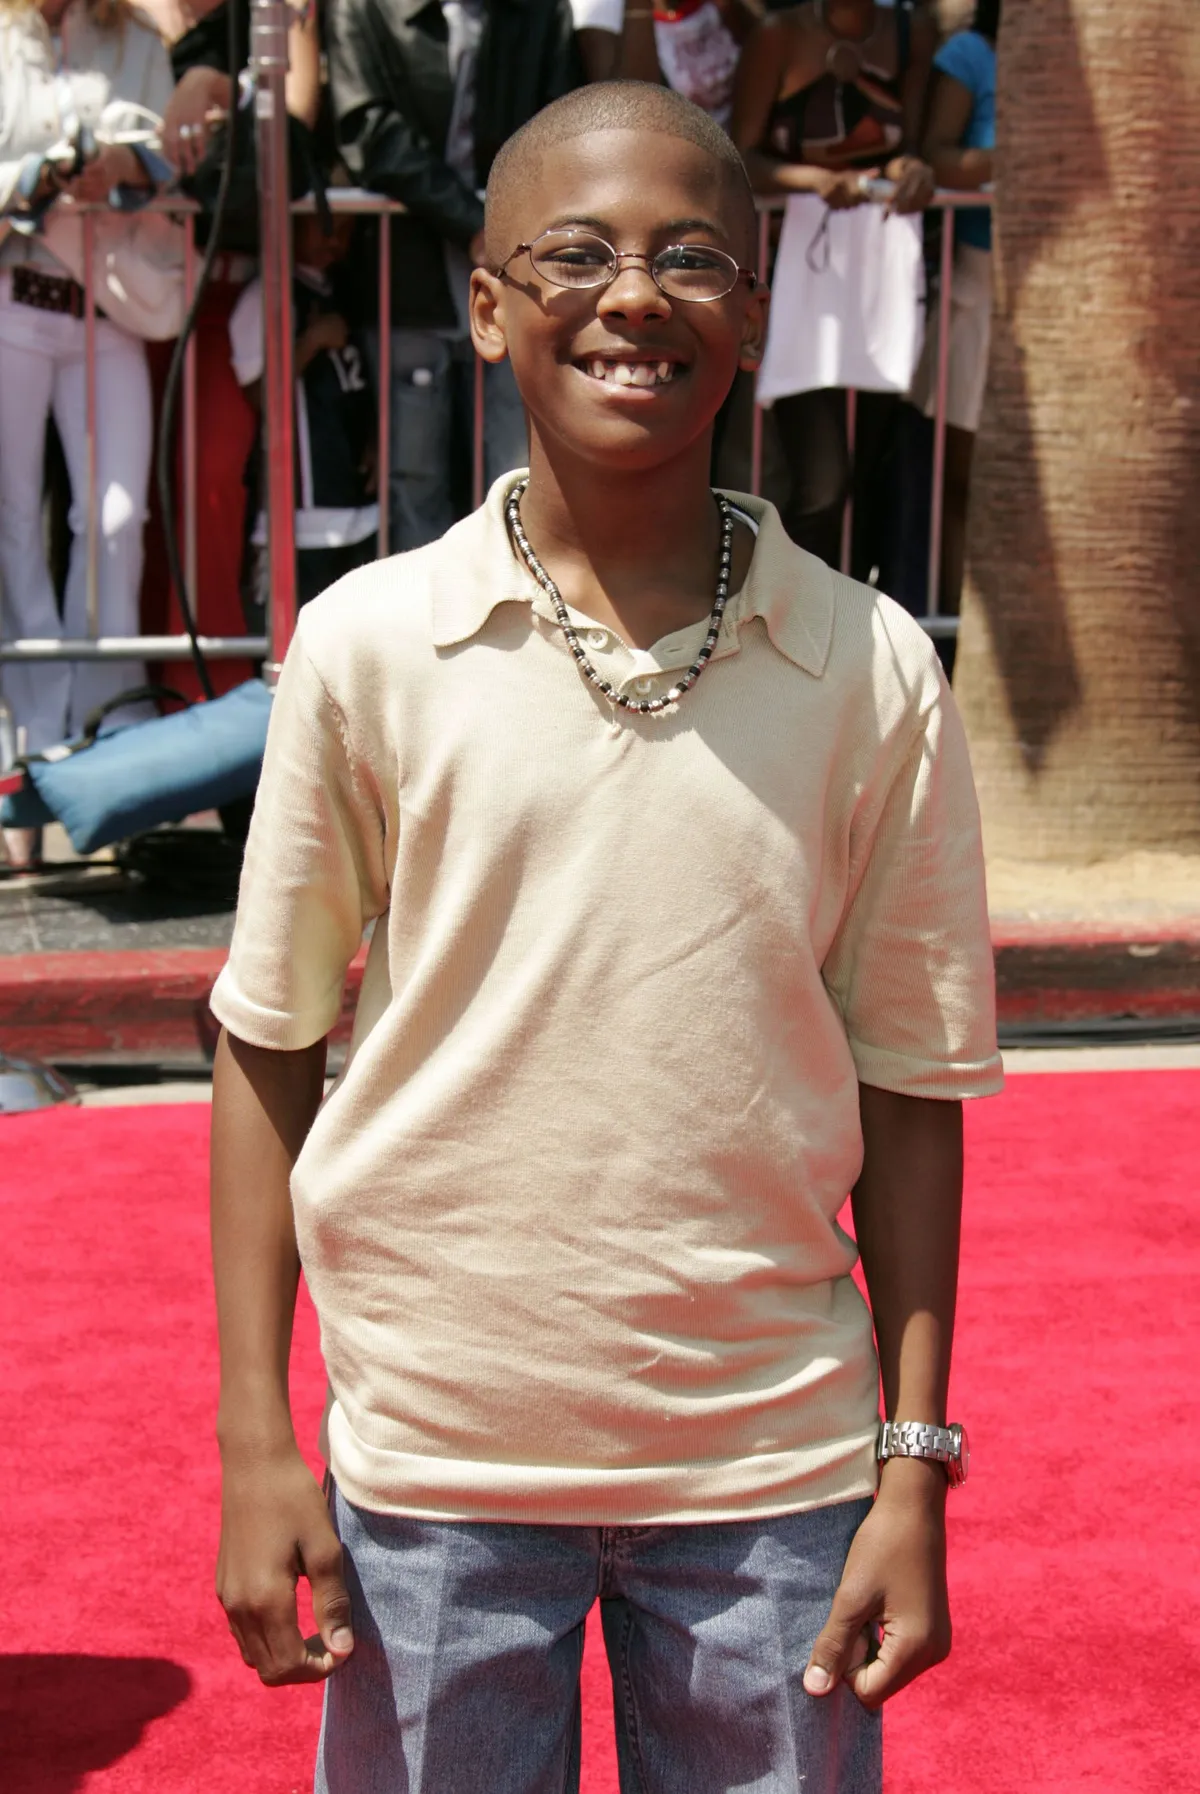 Jeremy Suarez at the 4th Annual BET Awards - Arrivals at Kodak Theatre in Hollywood on June 29, 2004 | Photo: Getty Images